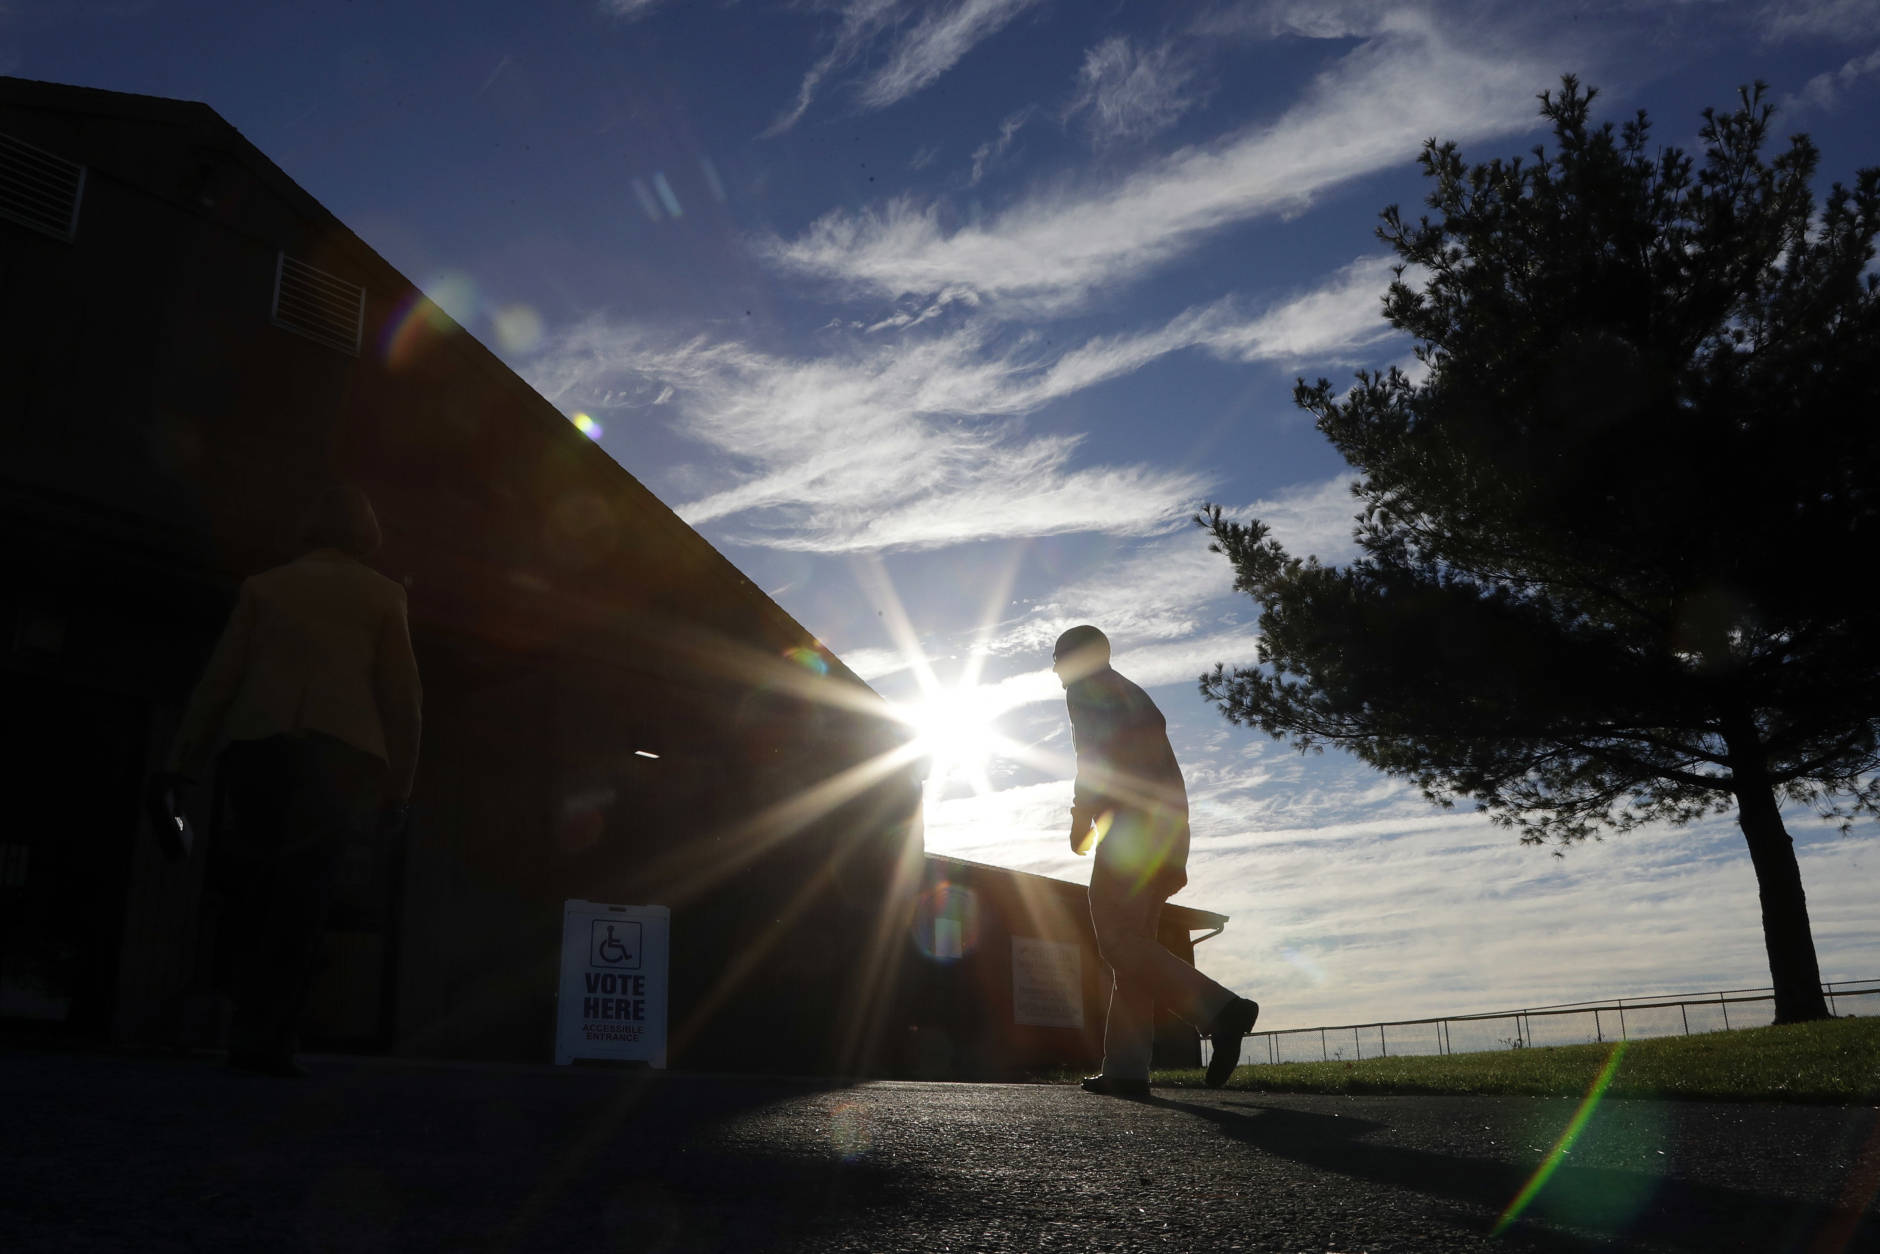 A voters walks to a polling place at the Schnecksville Fire Company, Tuesday, Nov. 8, 2016, in Schnecksville, Pa. (AP Photo/Matt Slocum)